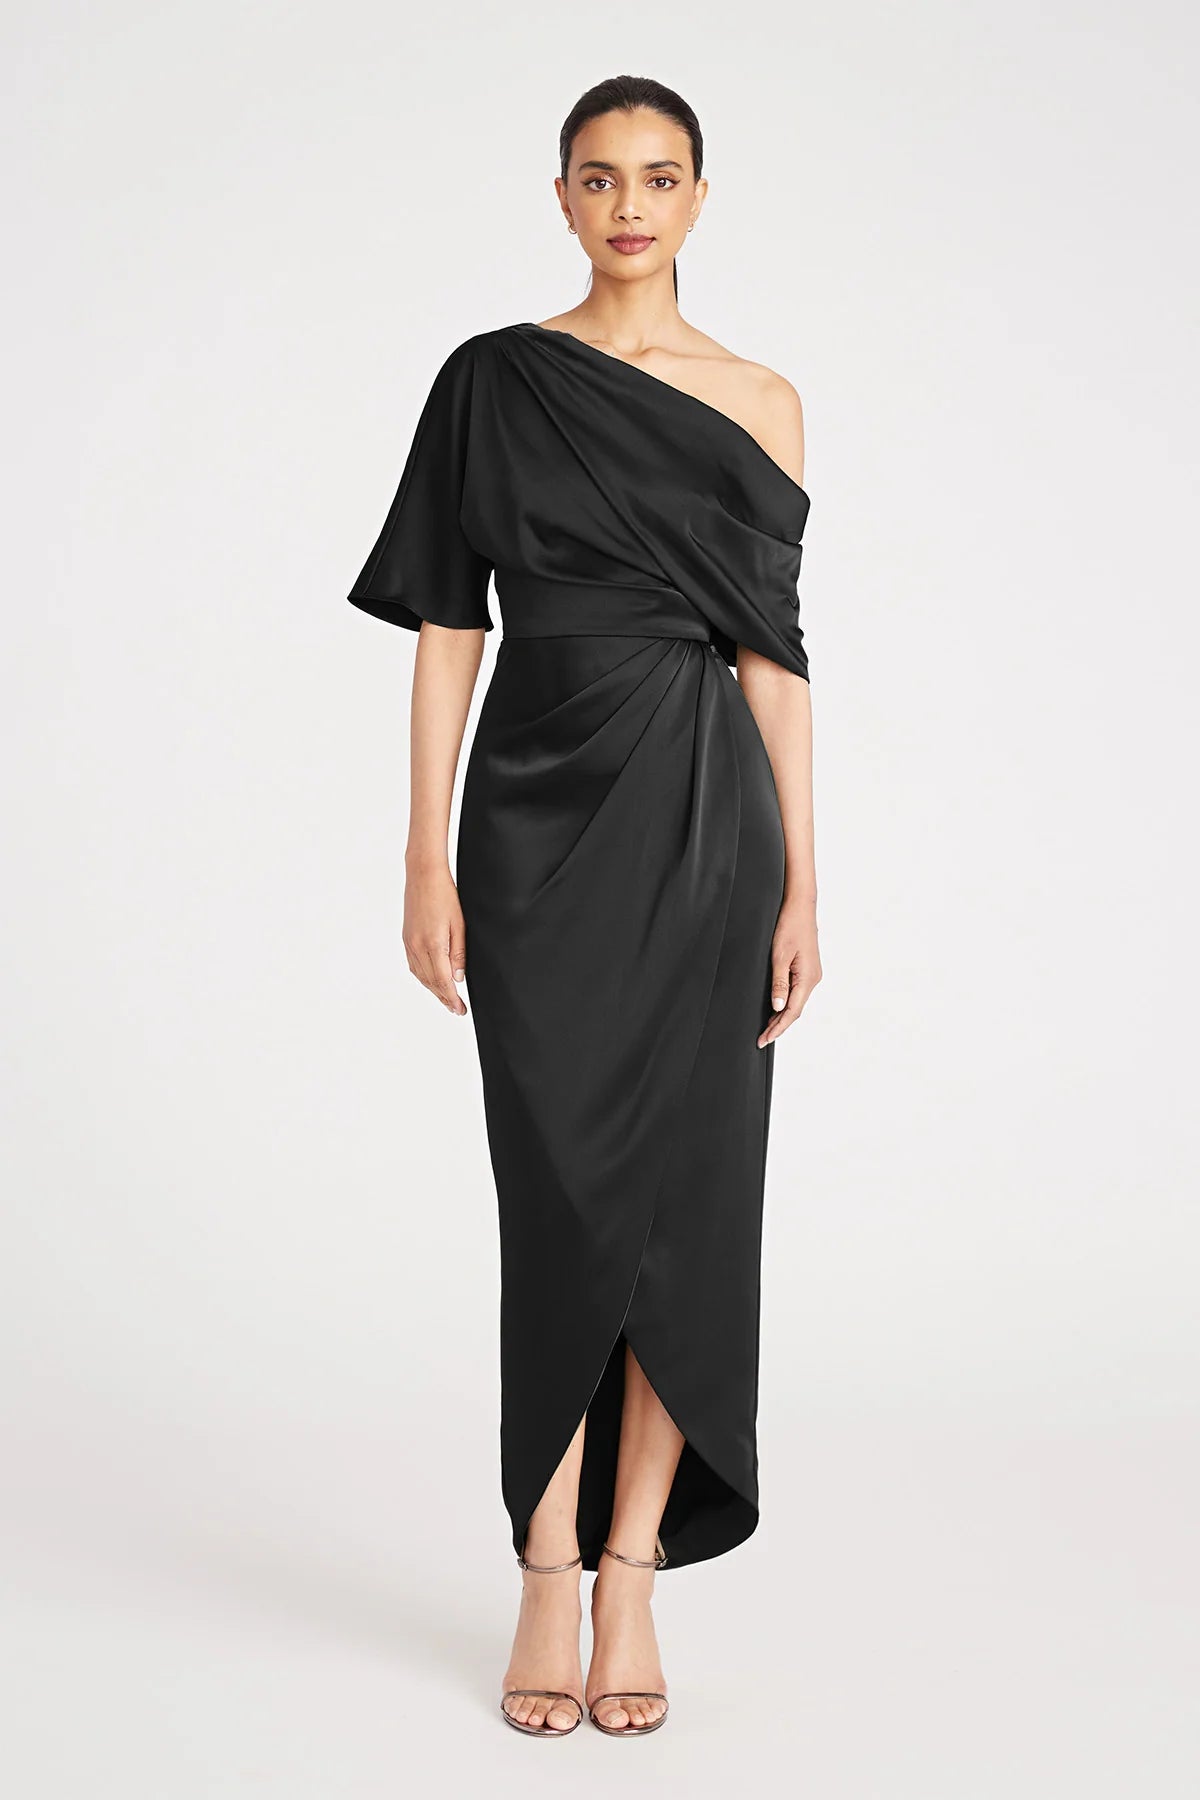 Theia 8818838 Asymmetric Tea-Length Dress in navy blue - Perfect for evening events, mothers of the bride or groom. Model is wearing the dress in Black.